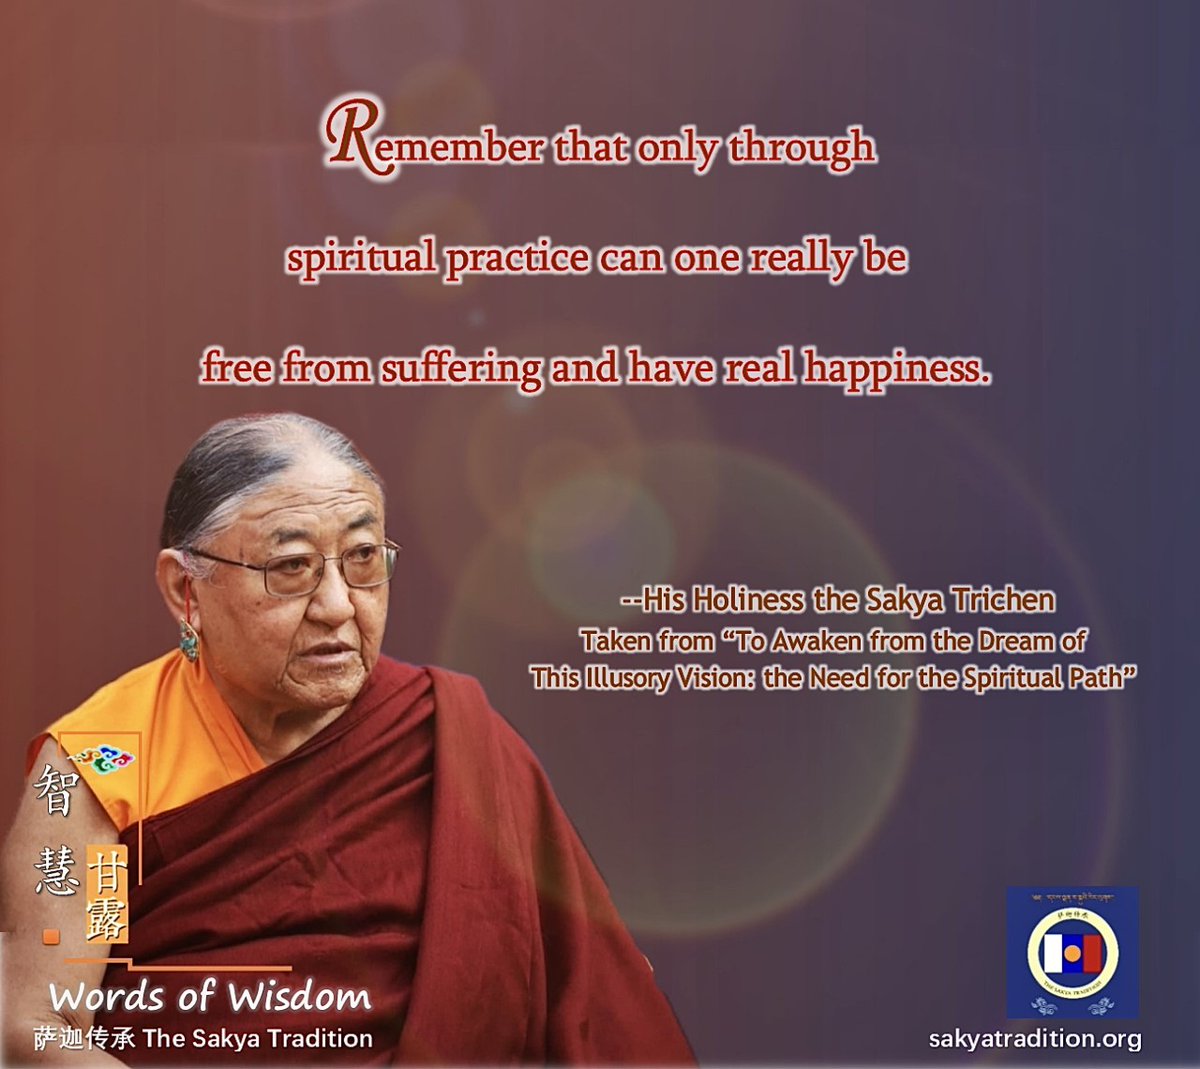 Remember that only through spiritual practice can one really be free from suffering and have real #Happiness . --His Holiness the Sakya Trichen  

#sakya #sakyapa #sakyatrichen #sakyatradition #buddha #happiness #buddhistquotes #Buddhism 
sakyatradition.org